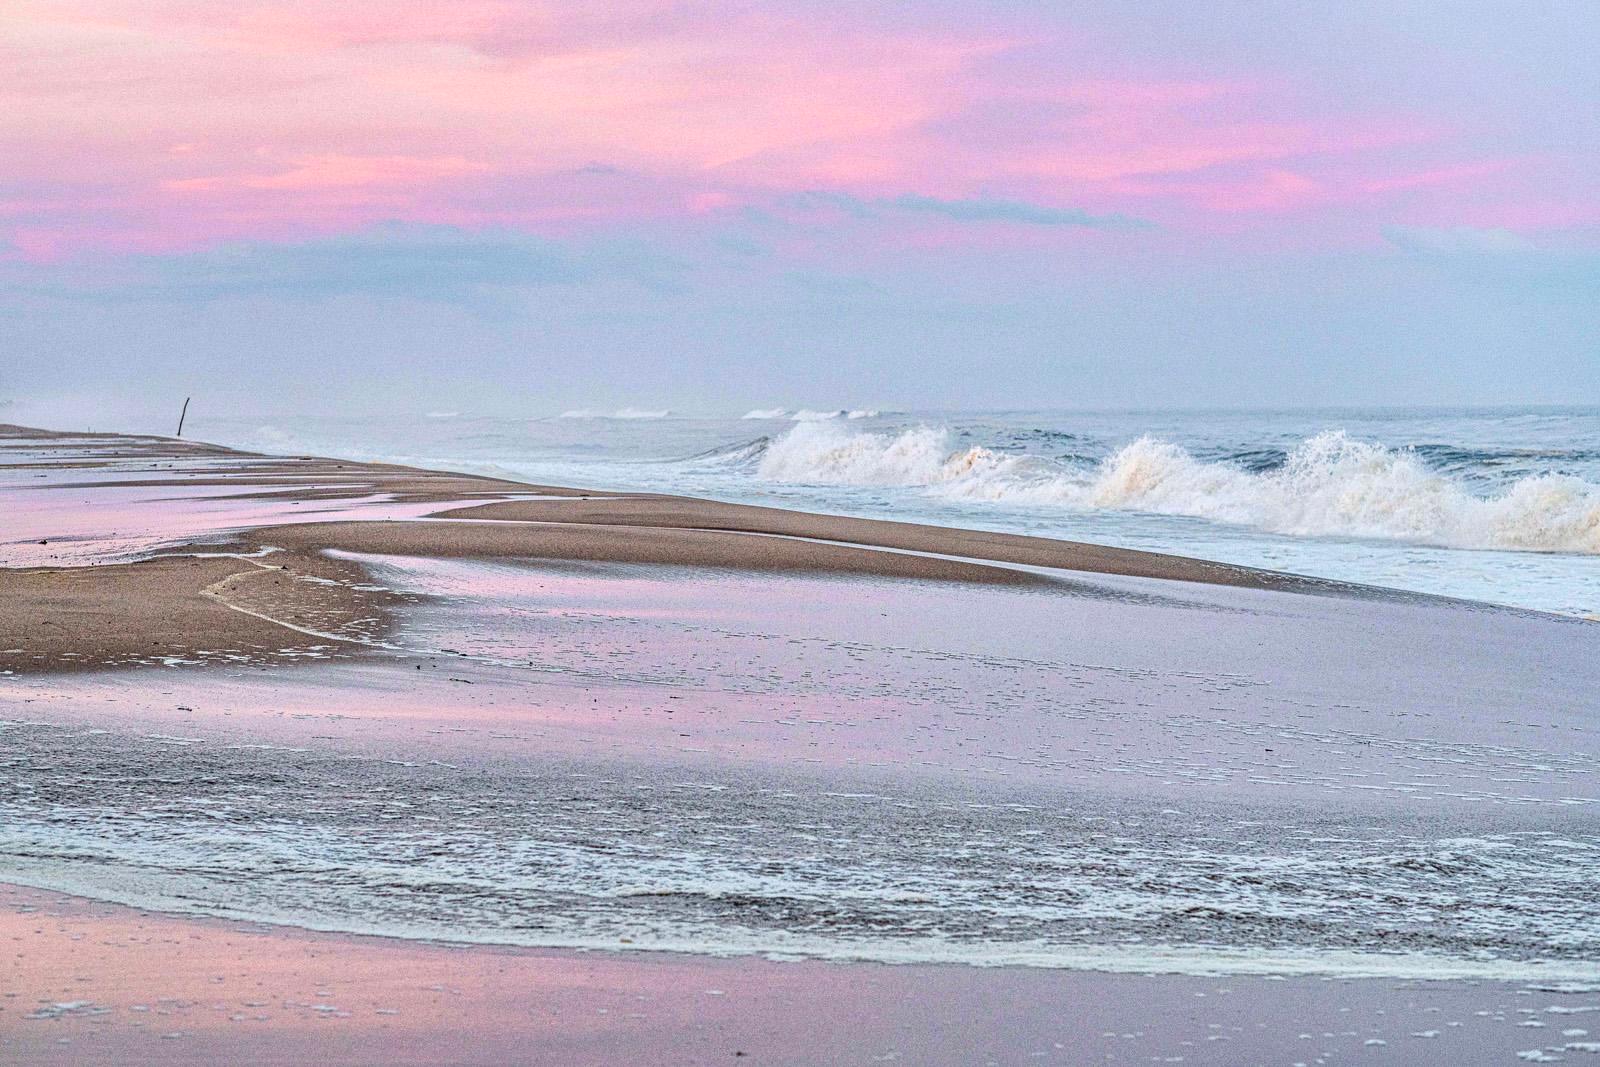 "Pink Surf"- Colorful Photo Shot on the Beach in Early Autumn Dusk 